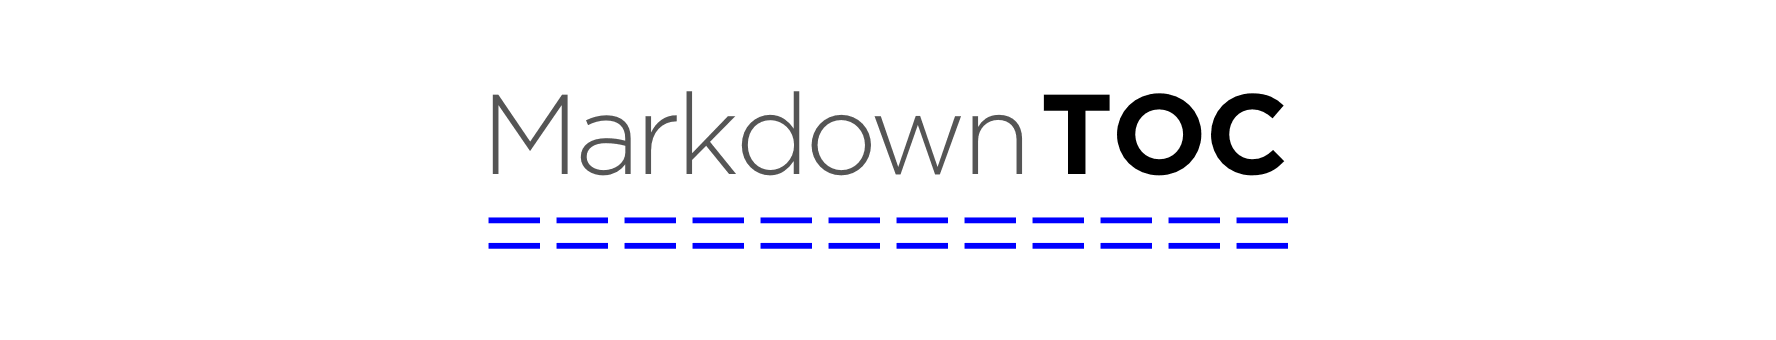 MarkdownTOC